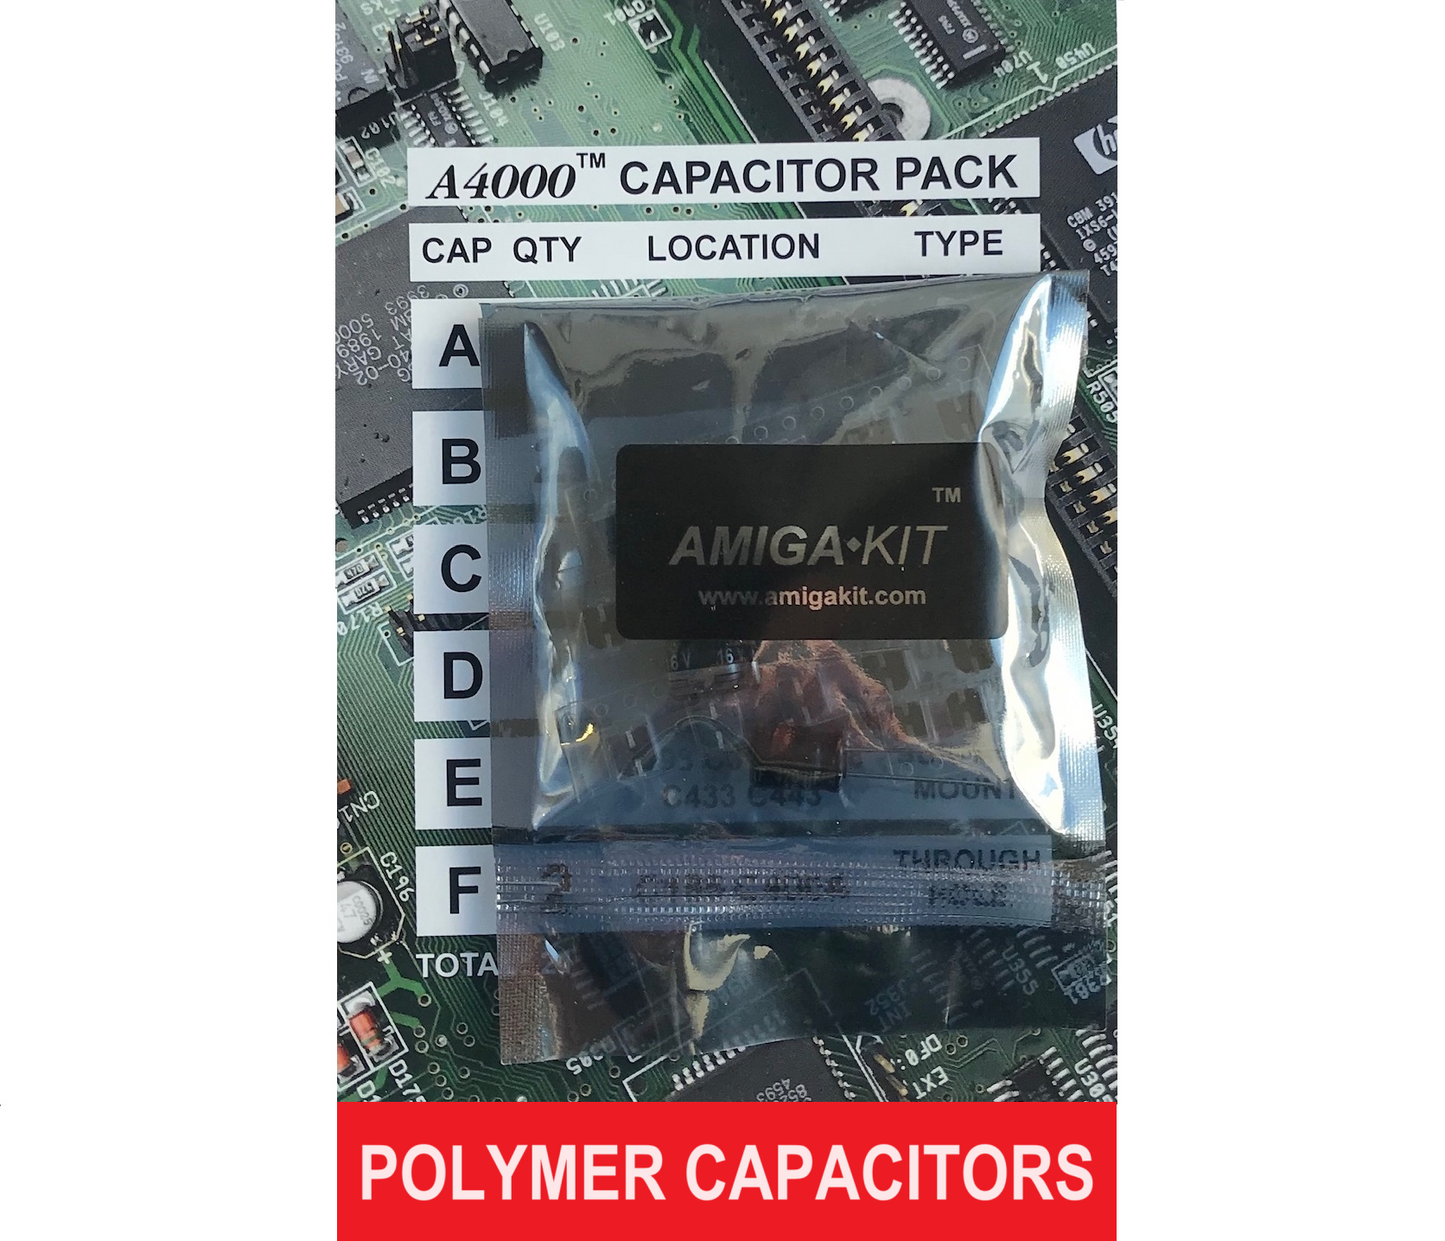 Premium Polymer Capacitor Pack for Amiga 4000 A4000 Recapping